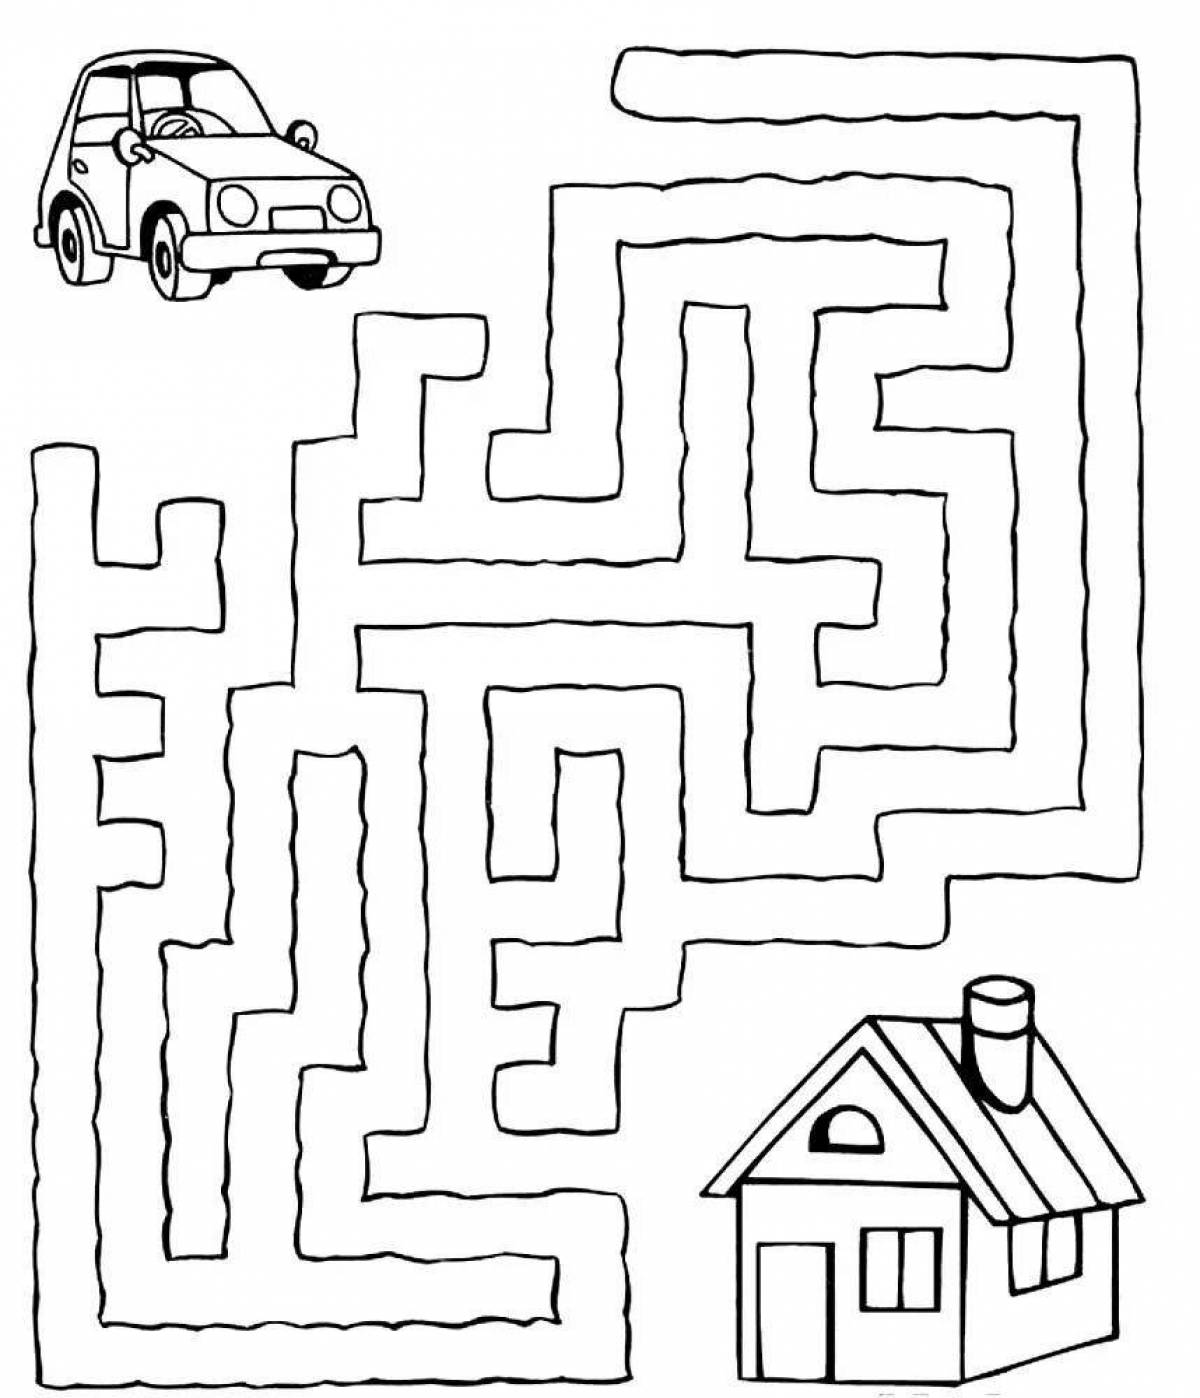 Complex coloring maze for children 4-5 years old